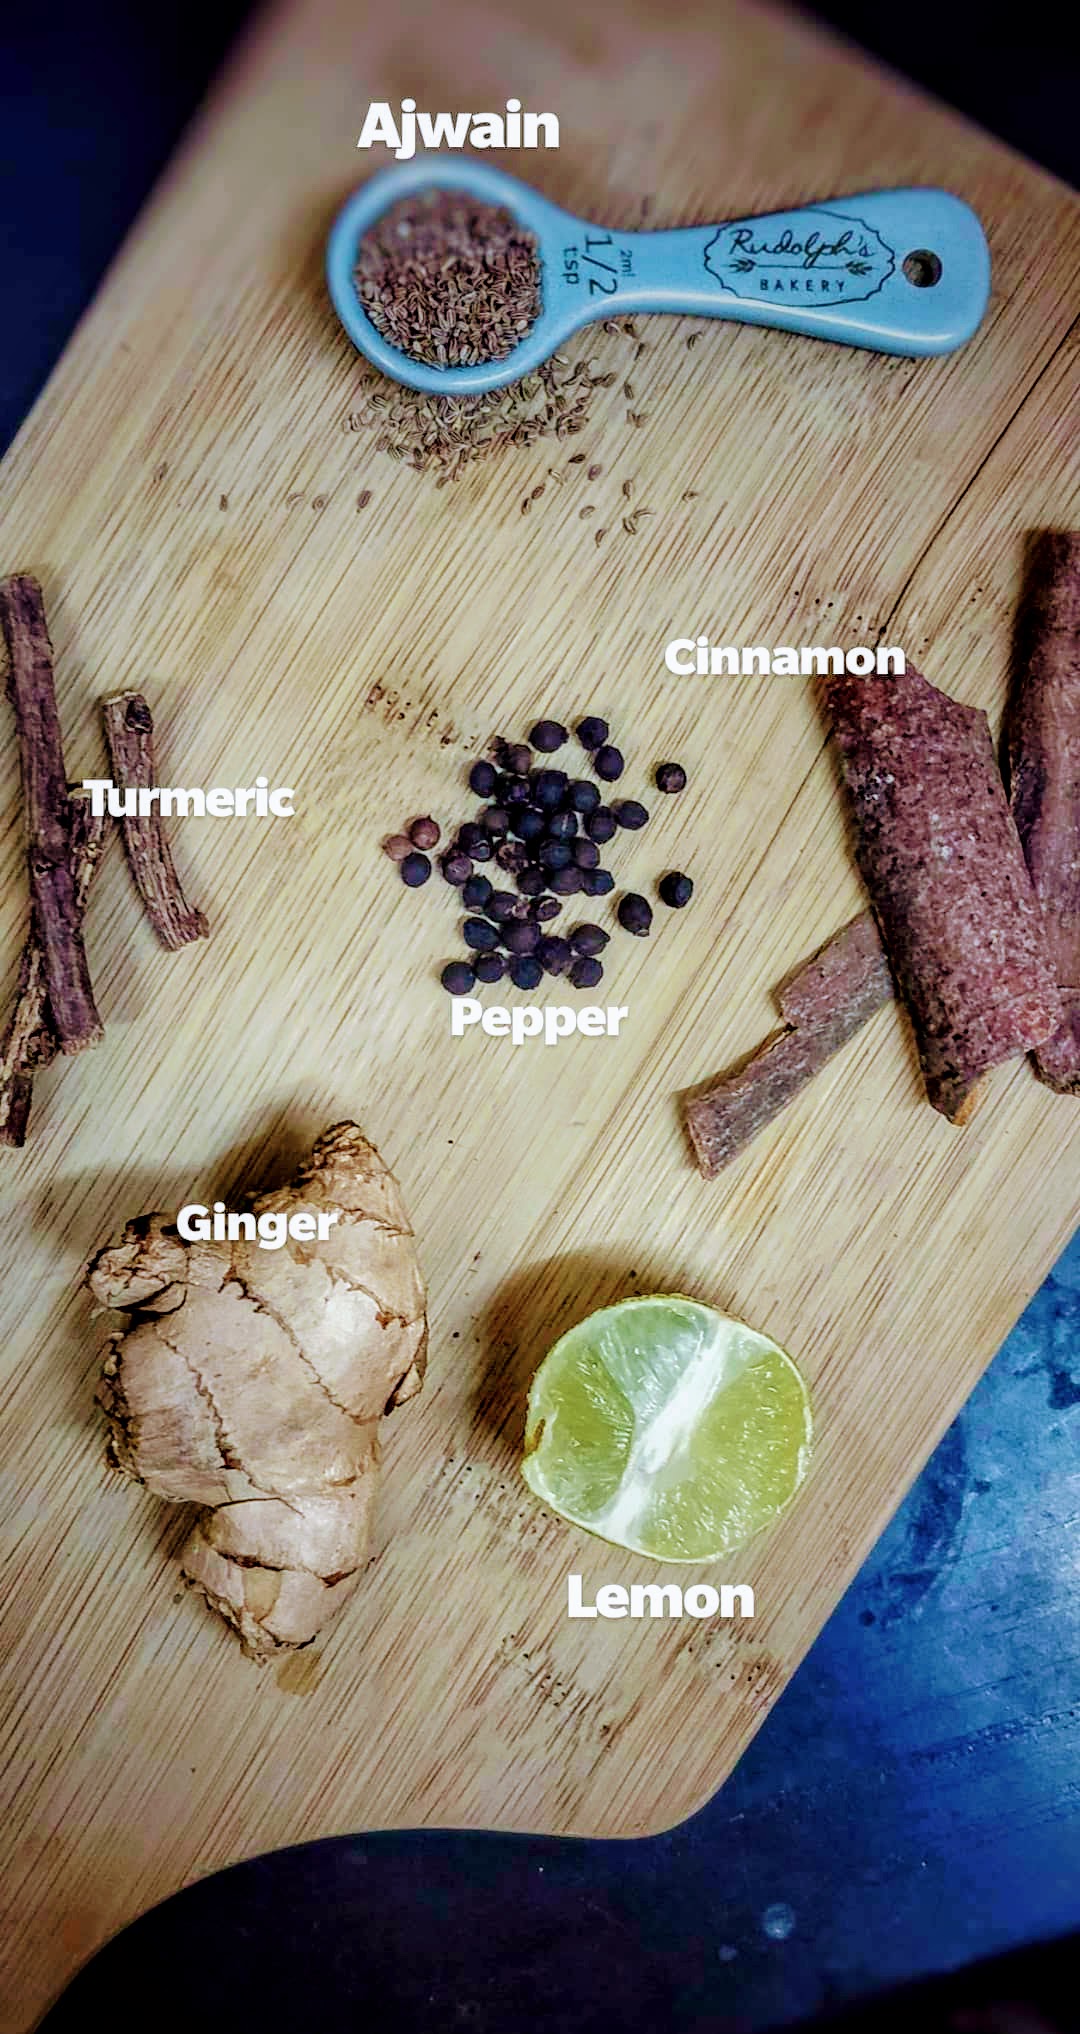 Some other spices I frequently use in my cooking.